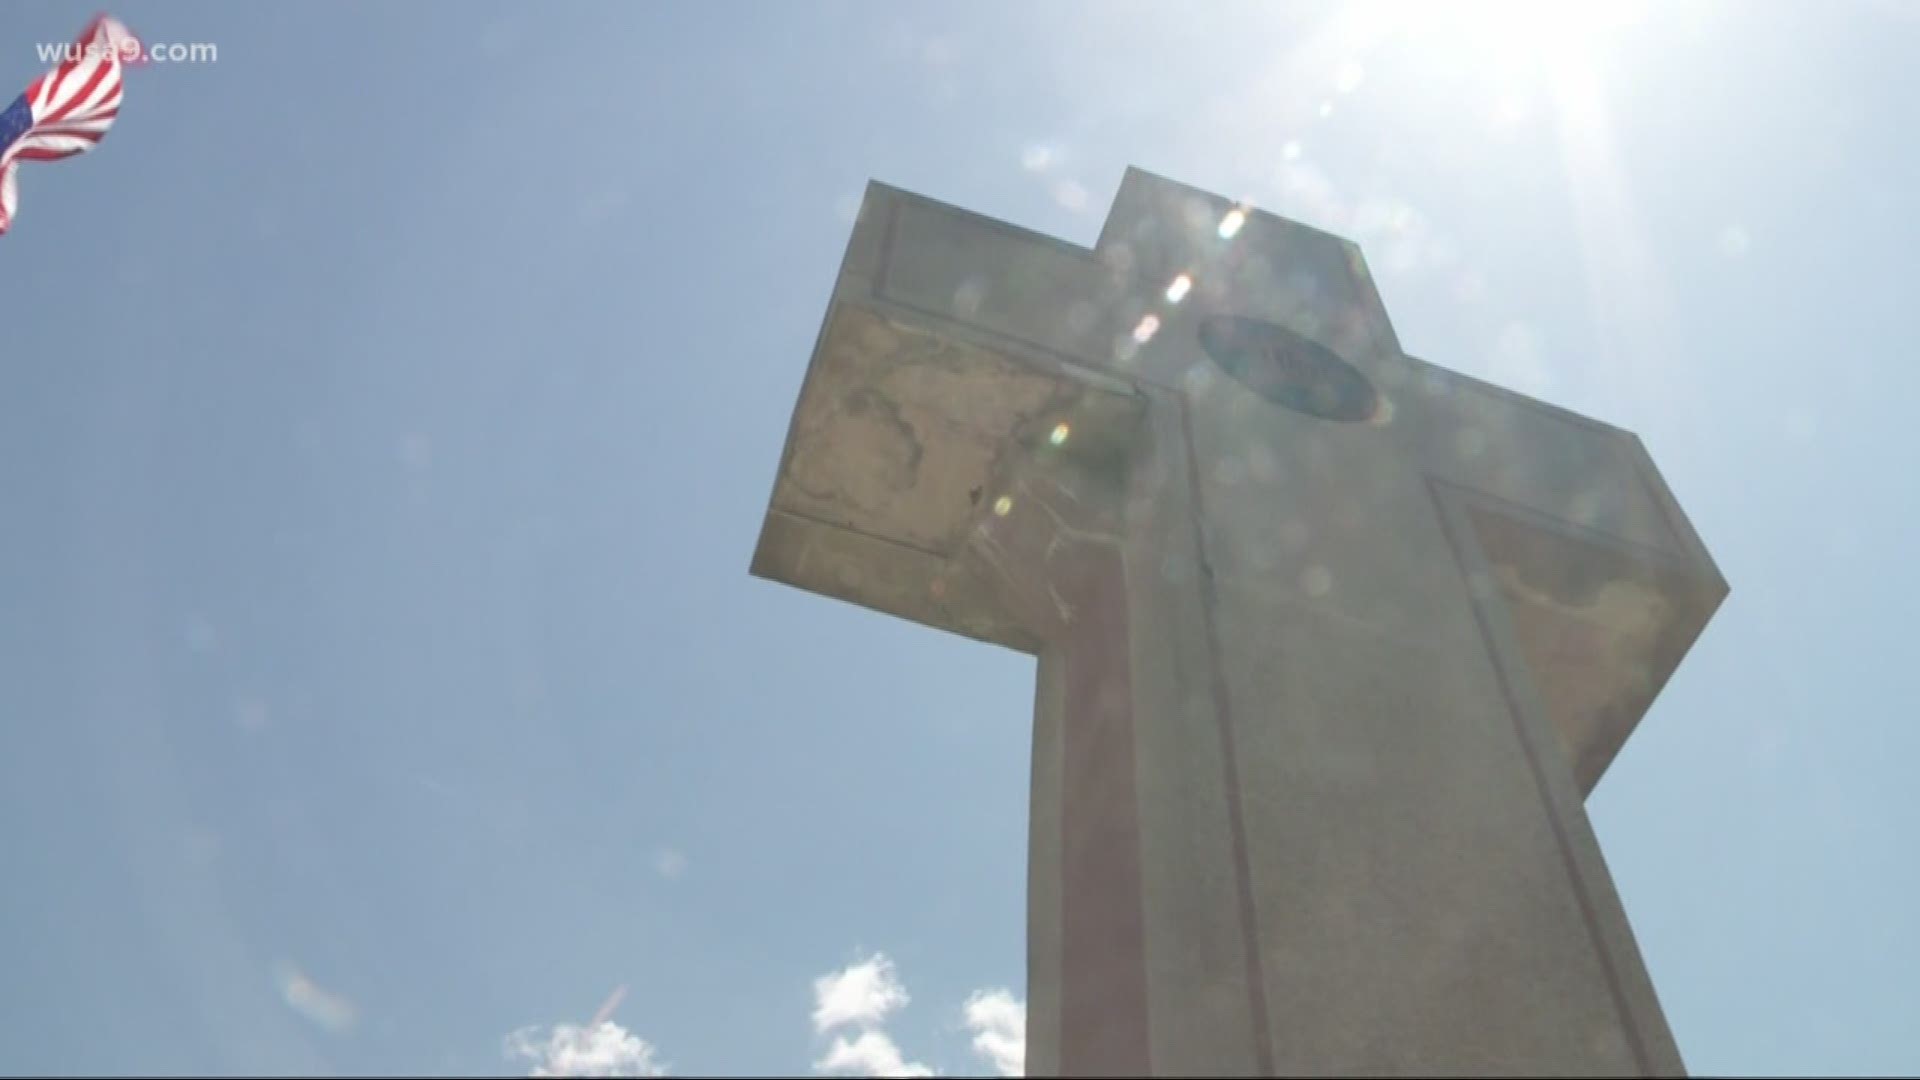 On Wednesday, the justices will consider whether the Bladensburg Peace Cross violates the constitutional separation of church and state.